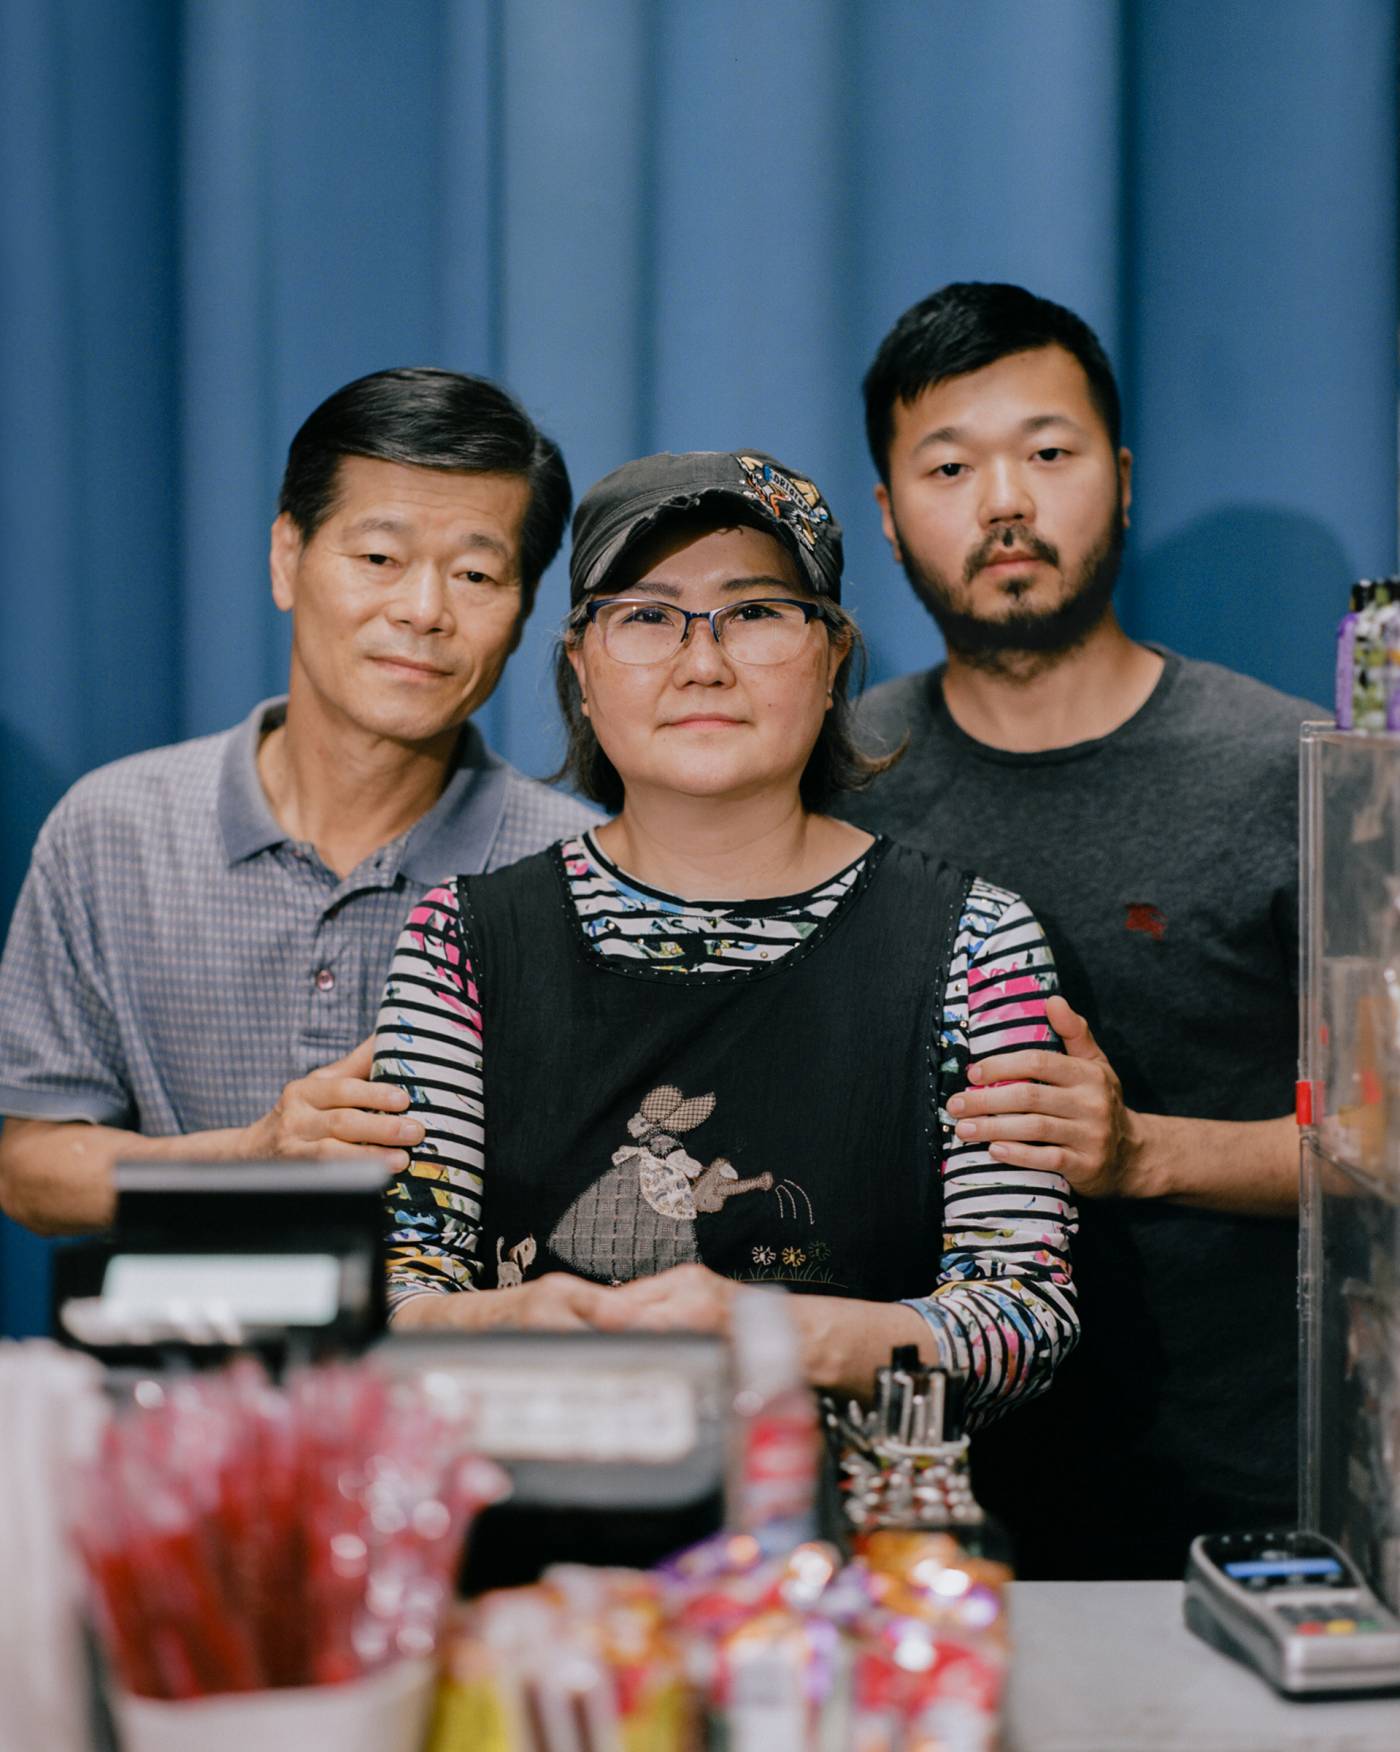 'I STILL WISH FOR A BETTER LIFE.' Mun Sung, left, and Joyce Sung, center, stand with their 35-year-old son Mark Sung, right, in the family’s Charlotte, N.C., convenience store on May 29. The elder Sungs watched helplessly on March 30 as a man smashed through glass with a metal pole, ripped down racks and hurled racial slurs at them inside the store they’ve owned for two decades. Despite facing racism at work on a daily basis since the pandemic began—even growing hardened to the hatred month after month—Mun never expected his family would fall victim to such violence. “I feel so terribly bad,” the 65-year-old says, “because how can people do that to us?” Less than two months later, it happened again. On May 25, after being told he did not have enough money for cigarettes, a customer shouted racial slurs as he pummeled a sheet of plexiglass at the checkout counter until it shattered on Joyce, 63, bruising her forehead. “Knowing that we’re going to get cursed out every day while we’re getting ready for work,” she says, pausing to think, “we don’t know what words to use.” The family has few other options. The pandemic drove down sales at the store by about 45%—and all their employees quit over safety concerns—so the Sungs say they don’t have the luxury to stop working. Instead, they clock in 13-hour days, seven days a week, and have developed a routine for responding to hate: call the police, assess the damage, file an insurance claim, then go back to work. It’s not the life Mun imagined for himself or his family when he left South Korea for the U.S. in 1983. But he and Joyce keep going, in large part to have some money to leave for Mark’s two toddlers, their only grandchildren. “The first time I came to the United States, I had big dreams and high hopes,” Mun says. “I didn’t make it, but I still wish for a better life.”